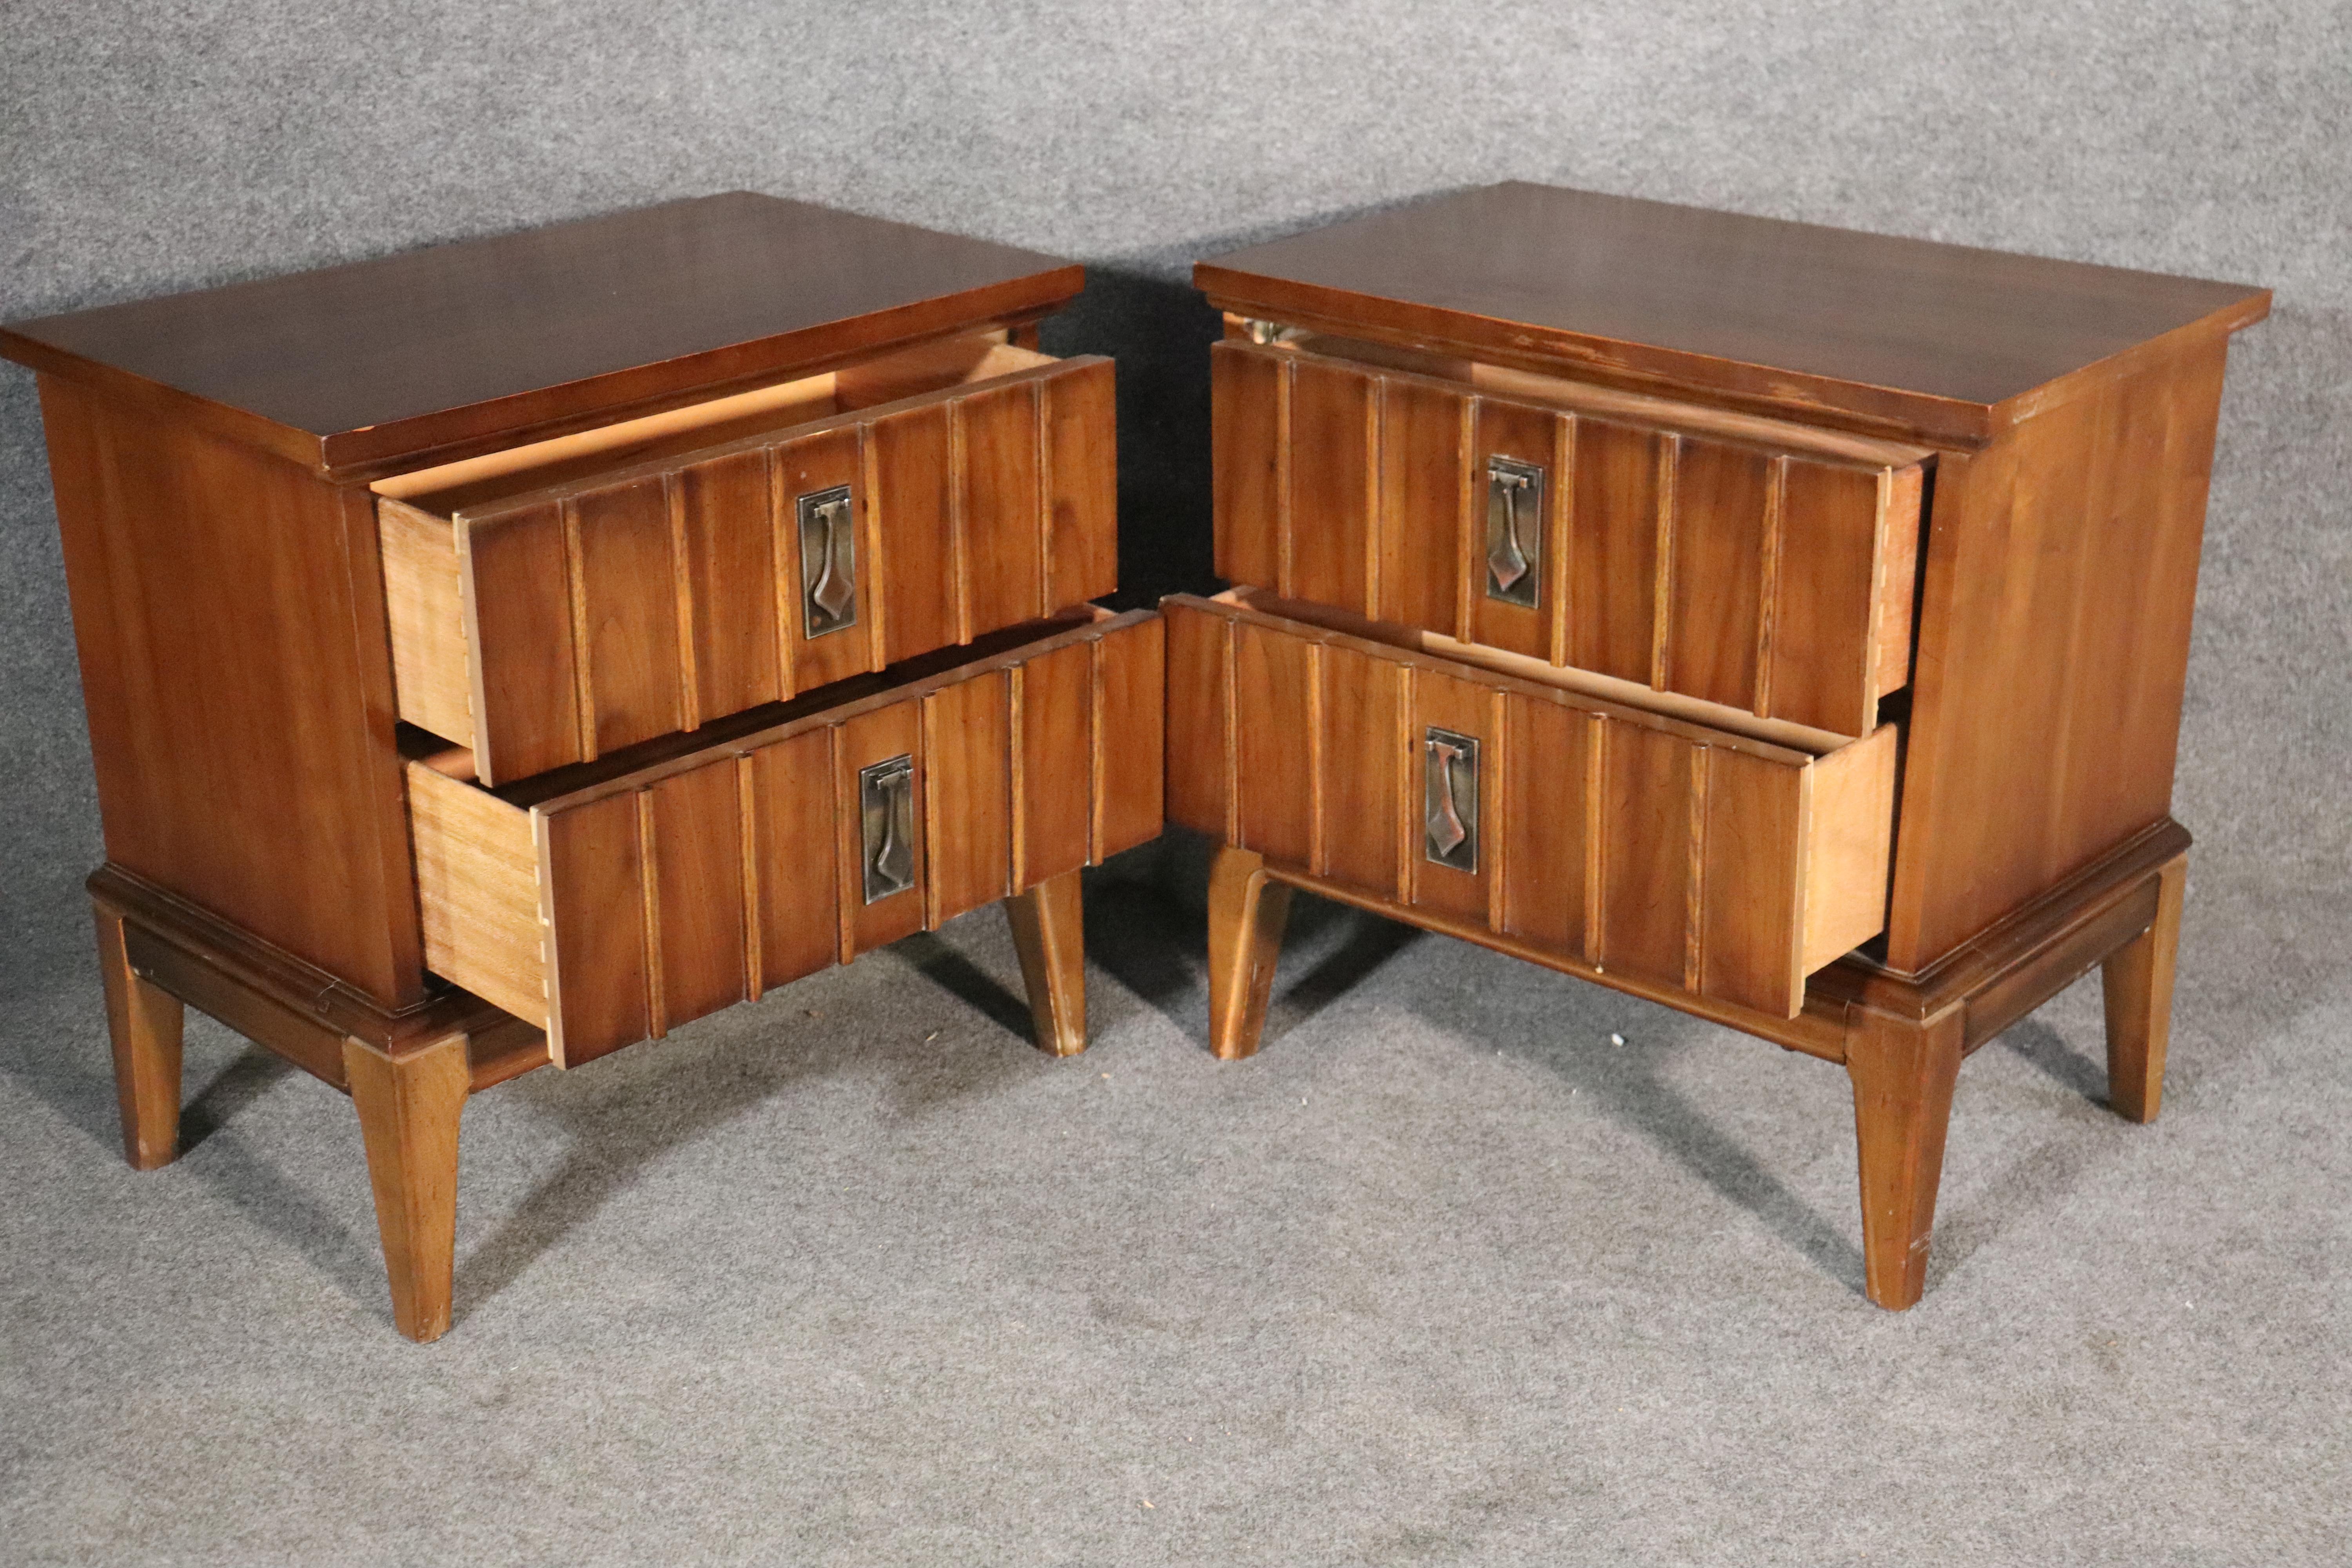 Pair of walnut wood nightstands by Dixie Furniture. Features their metal spade handles and textured front.
Please confirm location NY or NJ.